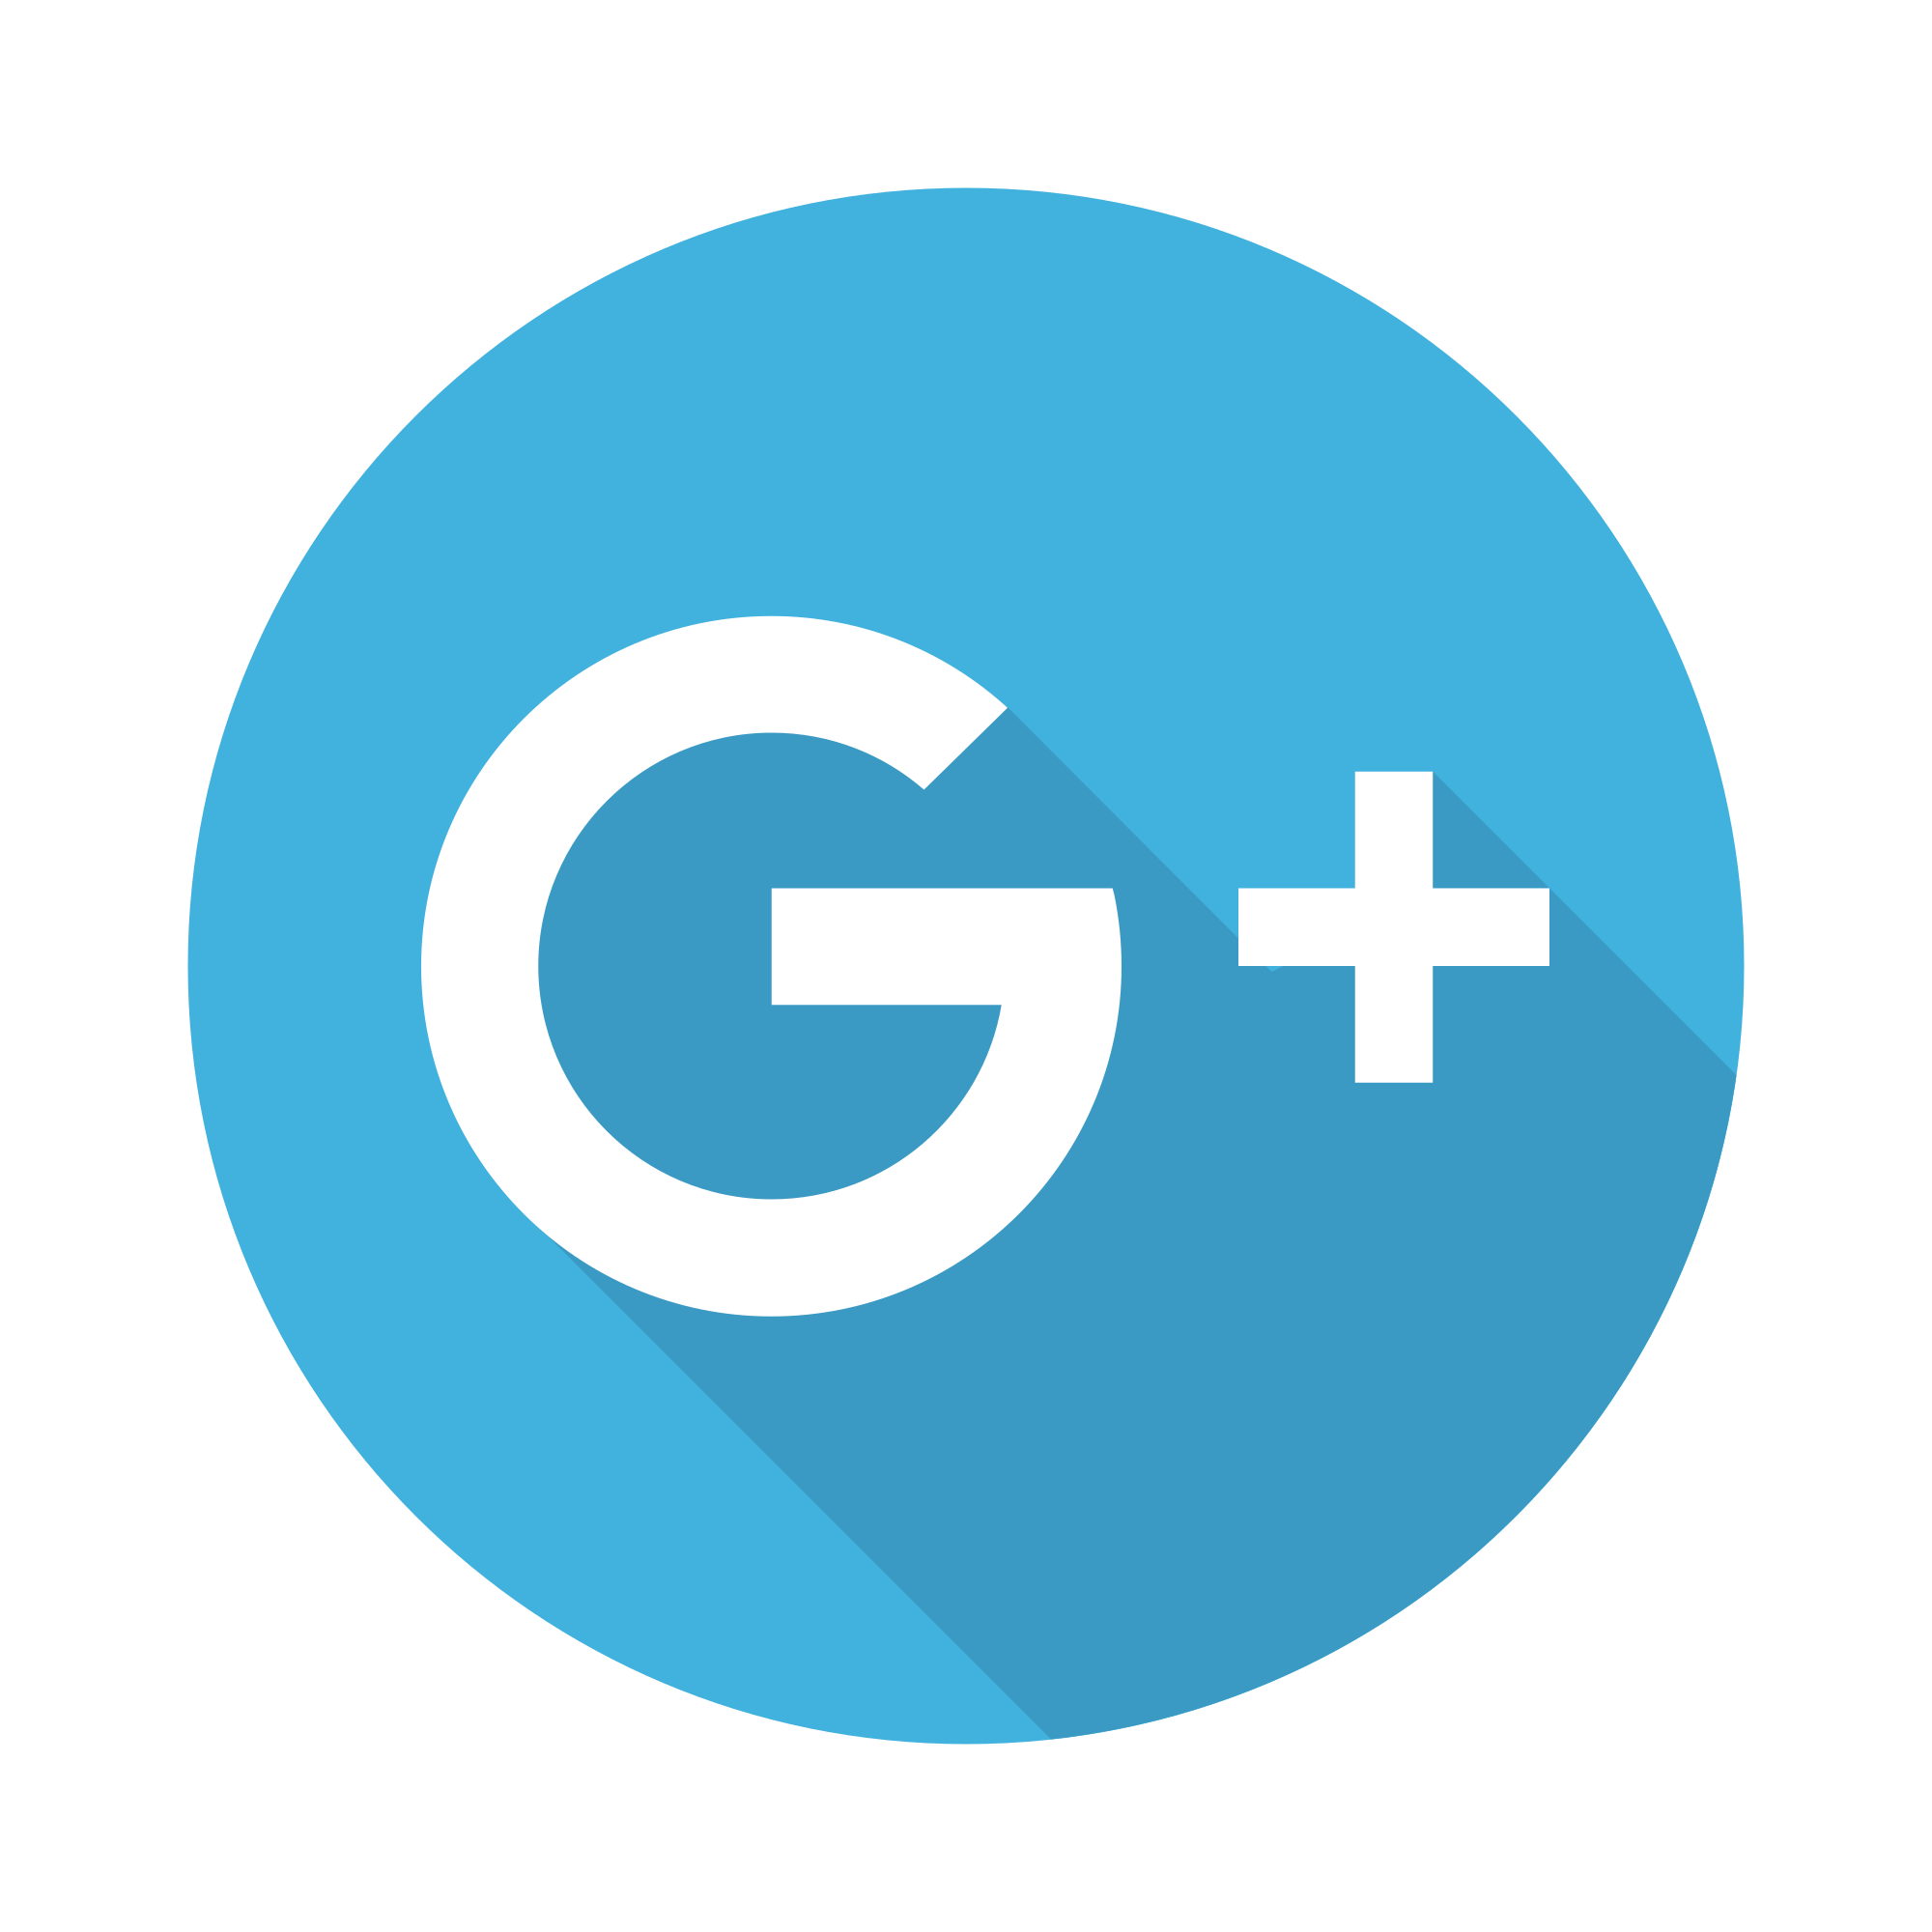 Download Google Plus Icon Svg 257892 Free Icons Library